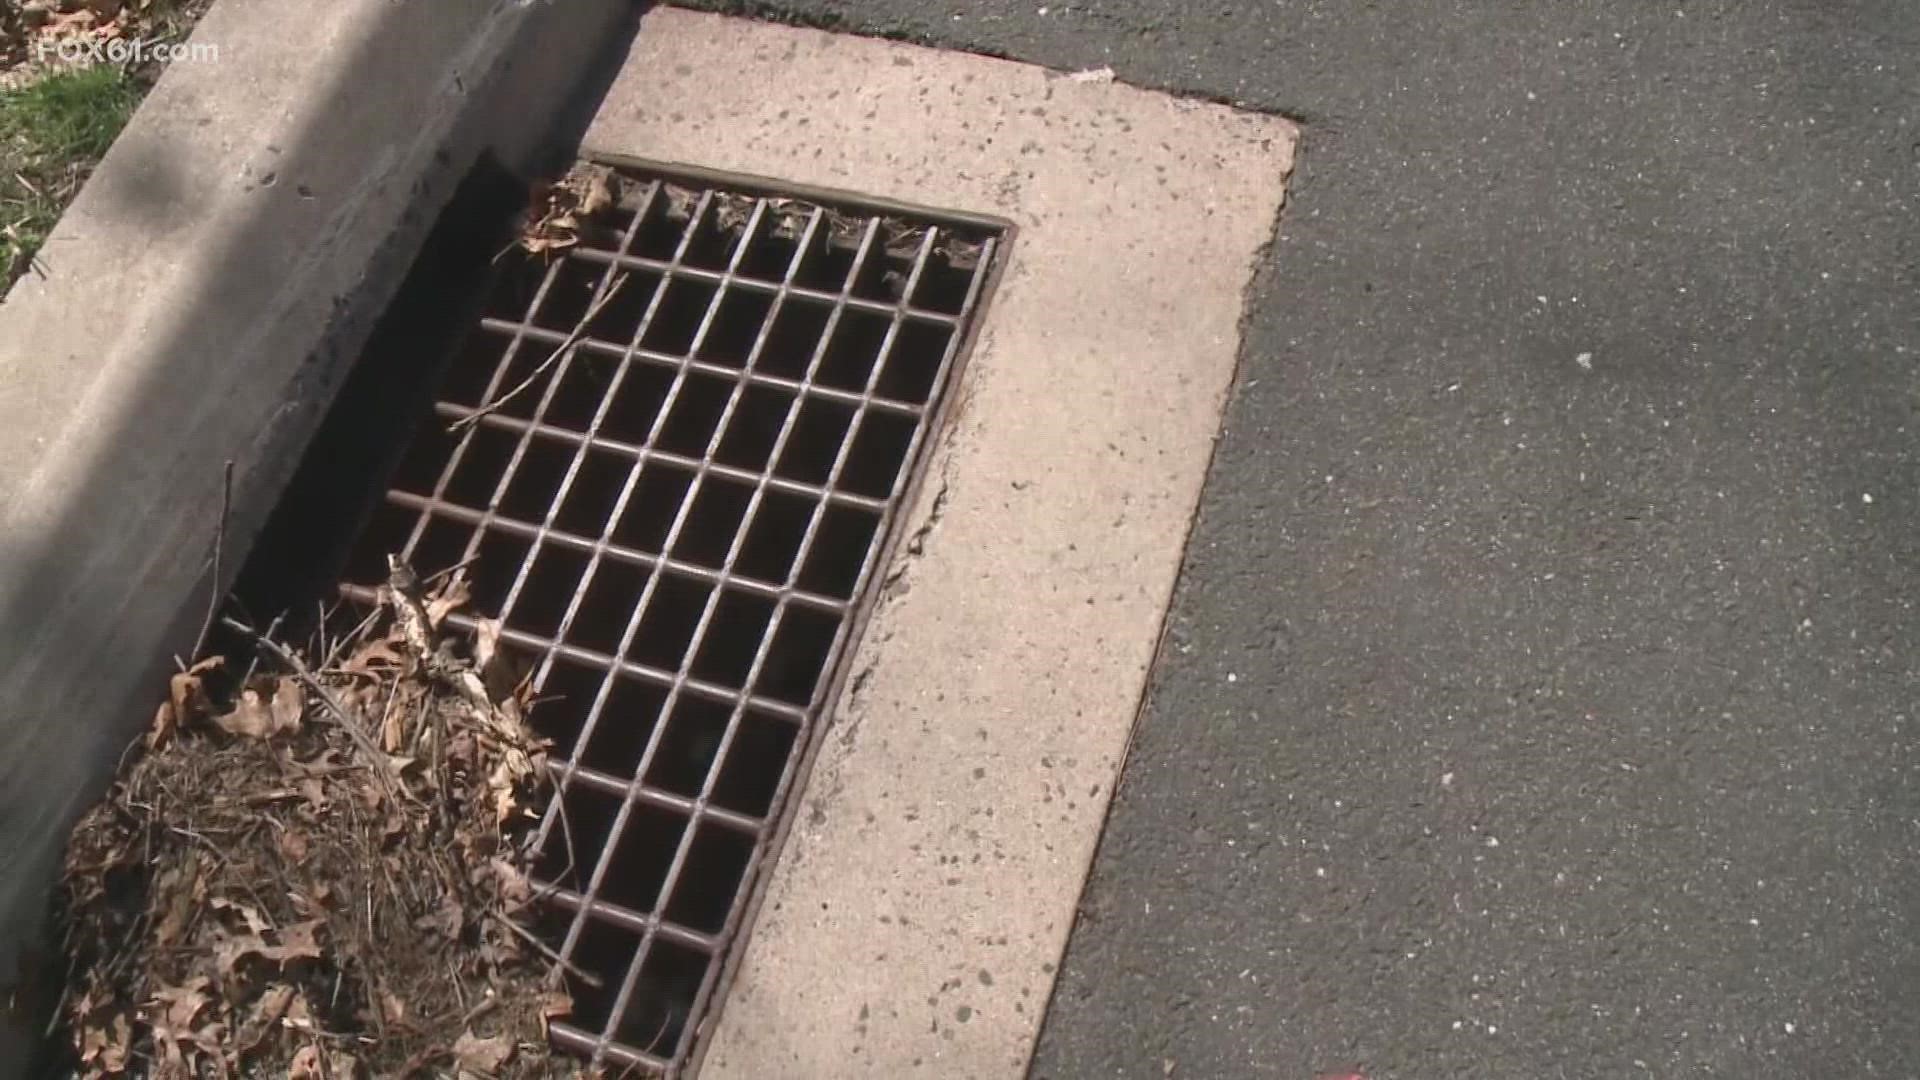 The removal of the drains leaves an almost 15 foot drop